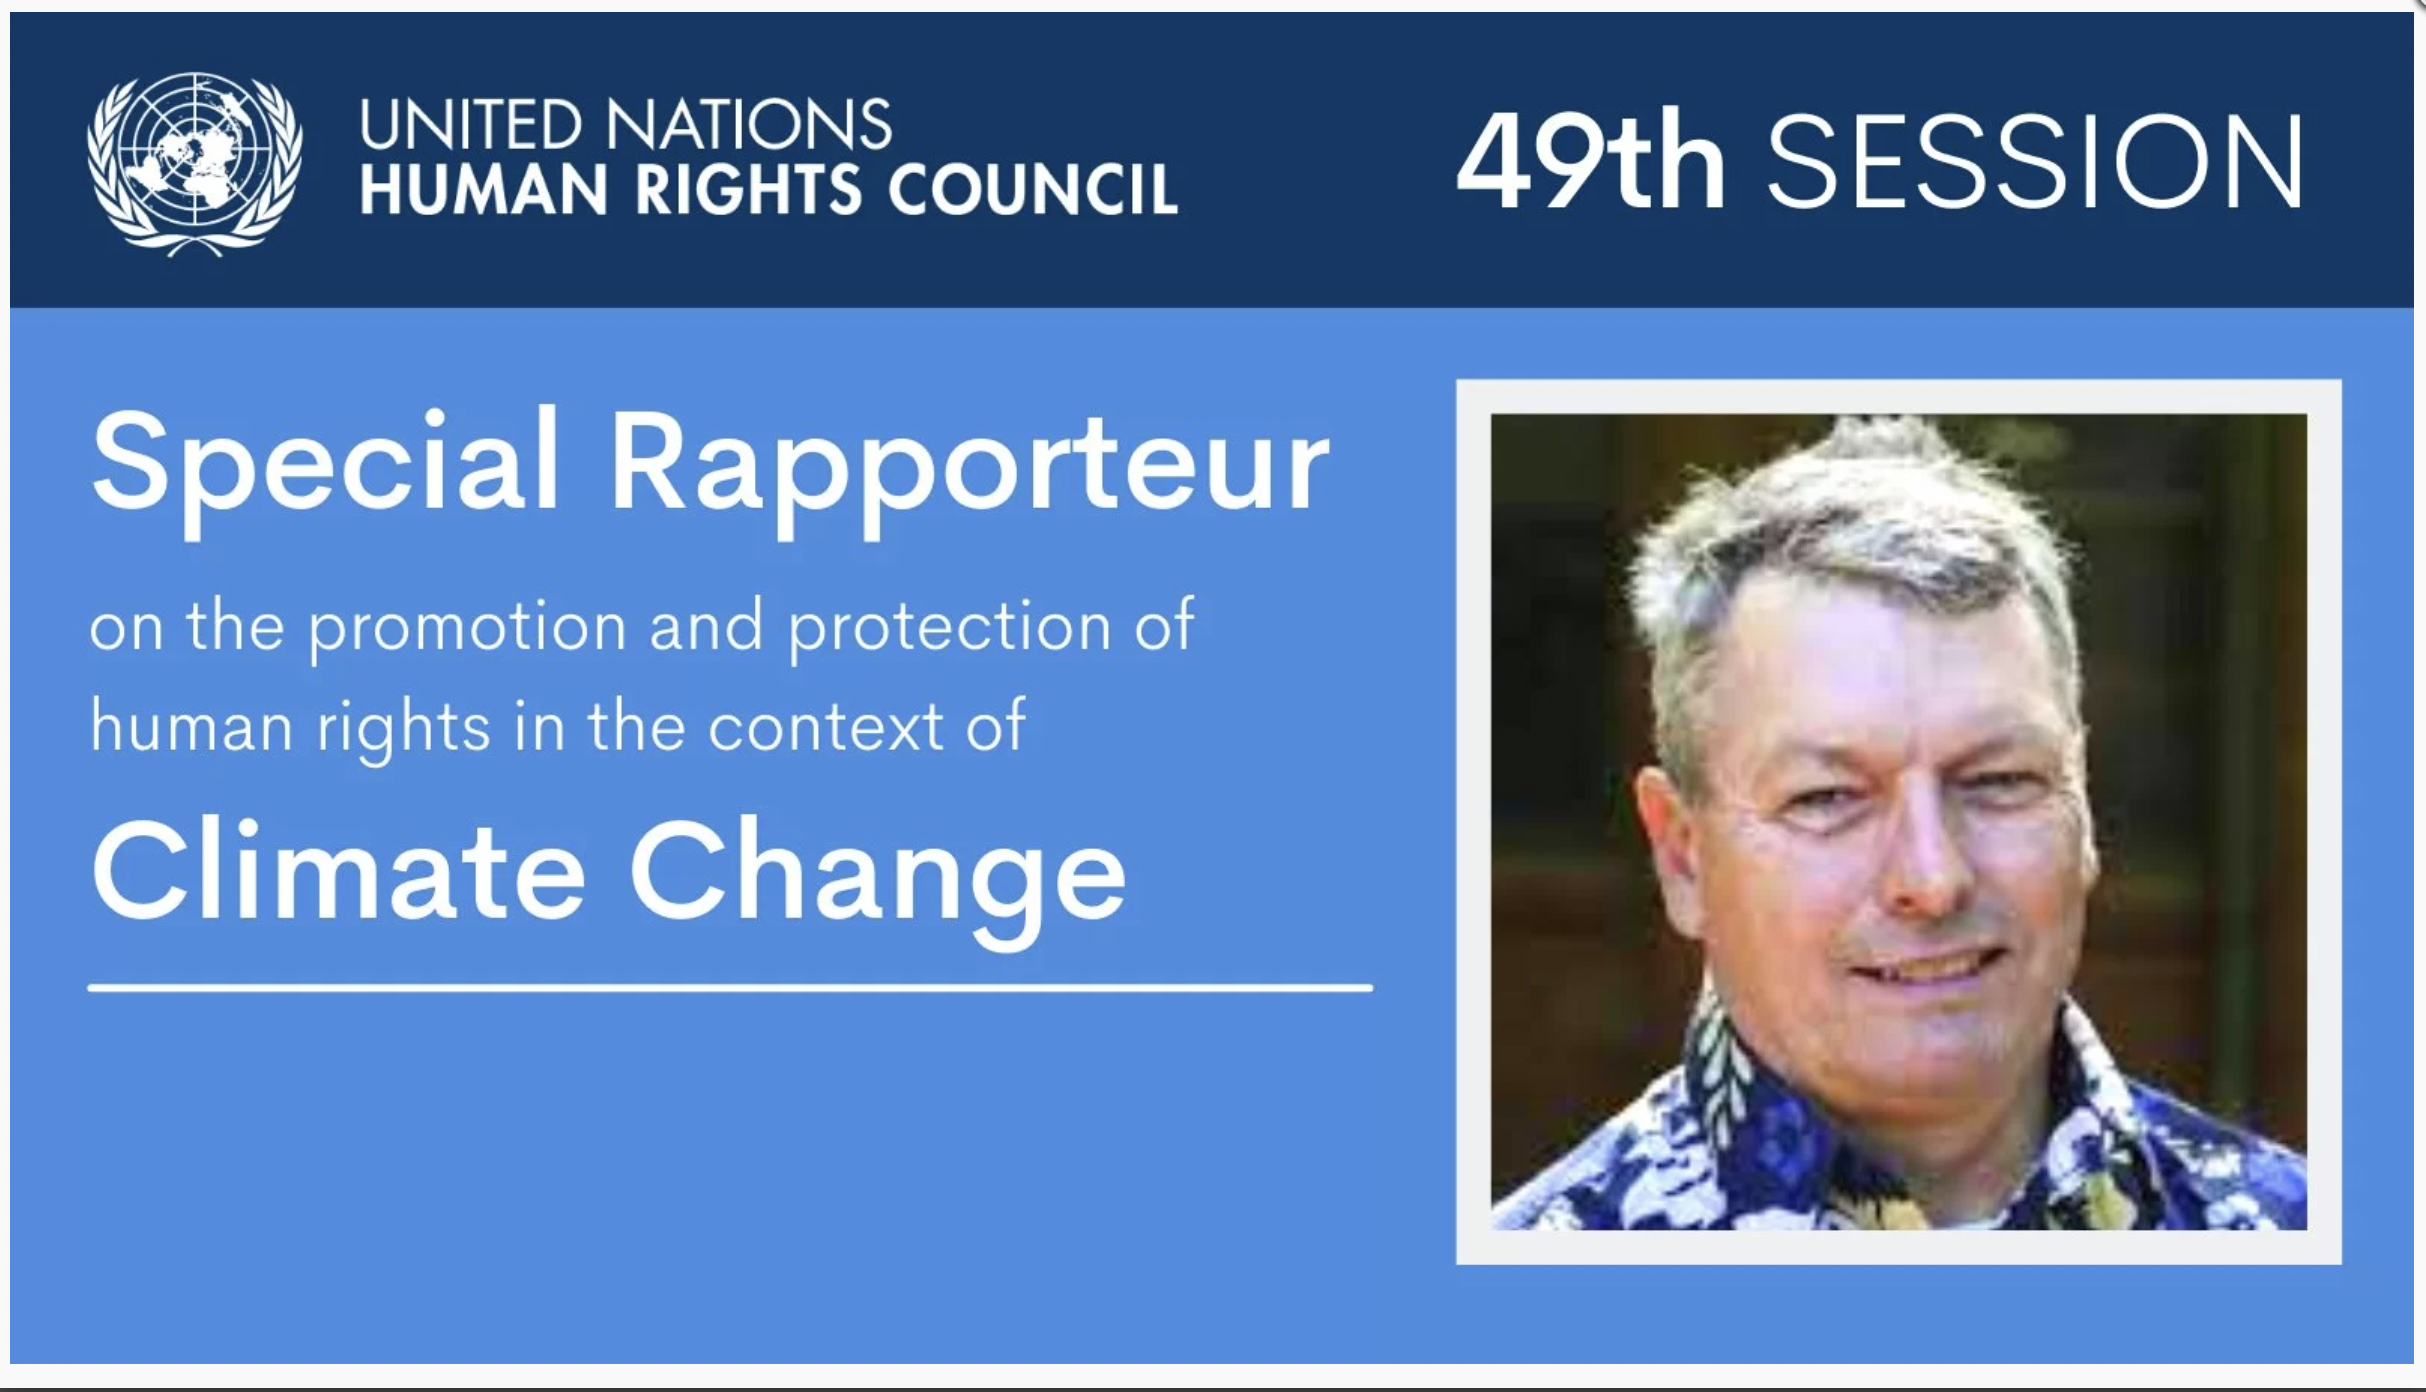 THE IMPORTANCE OF THE APPOINTMENT OF THE FIRST UN SPECIAL RAPPORTEUR ON HUMAN RIGHTS AND CLIMATE CHANGE